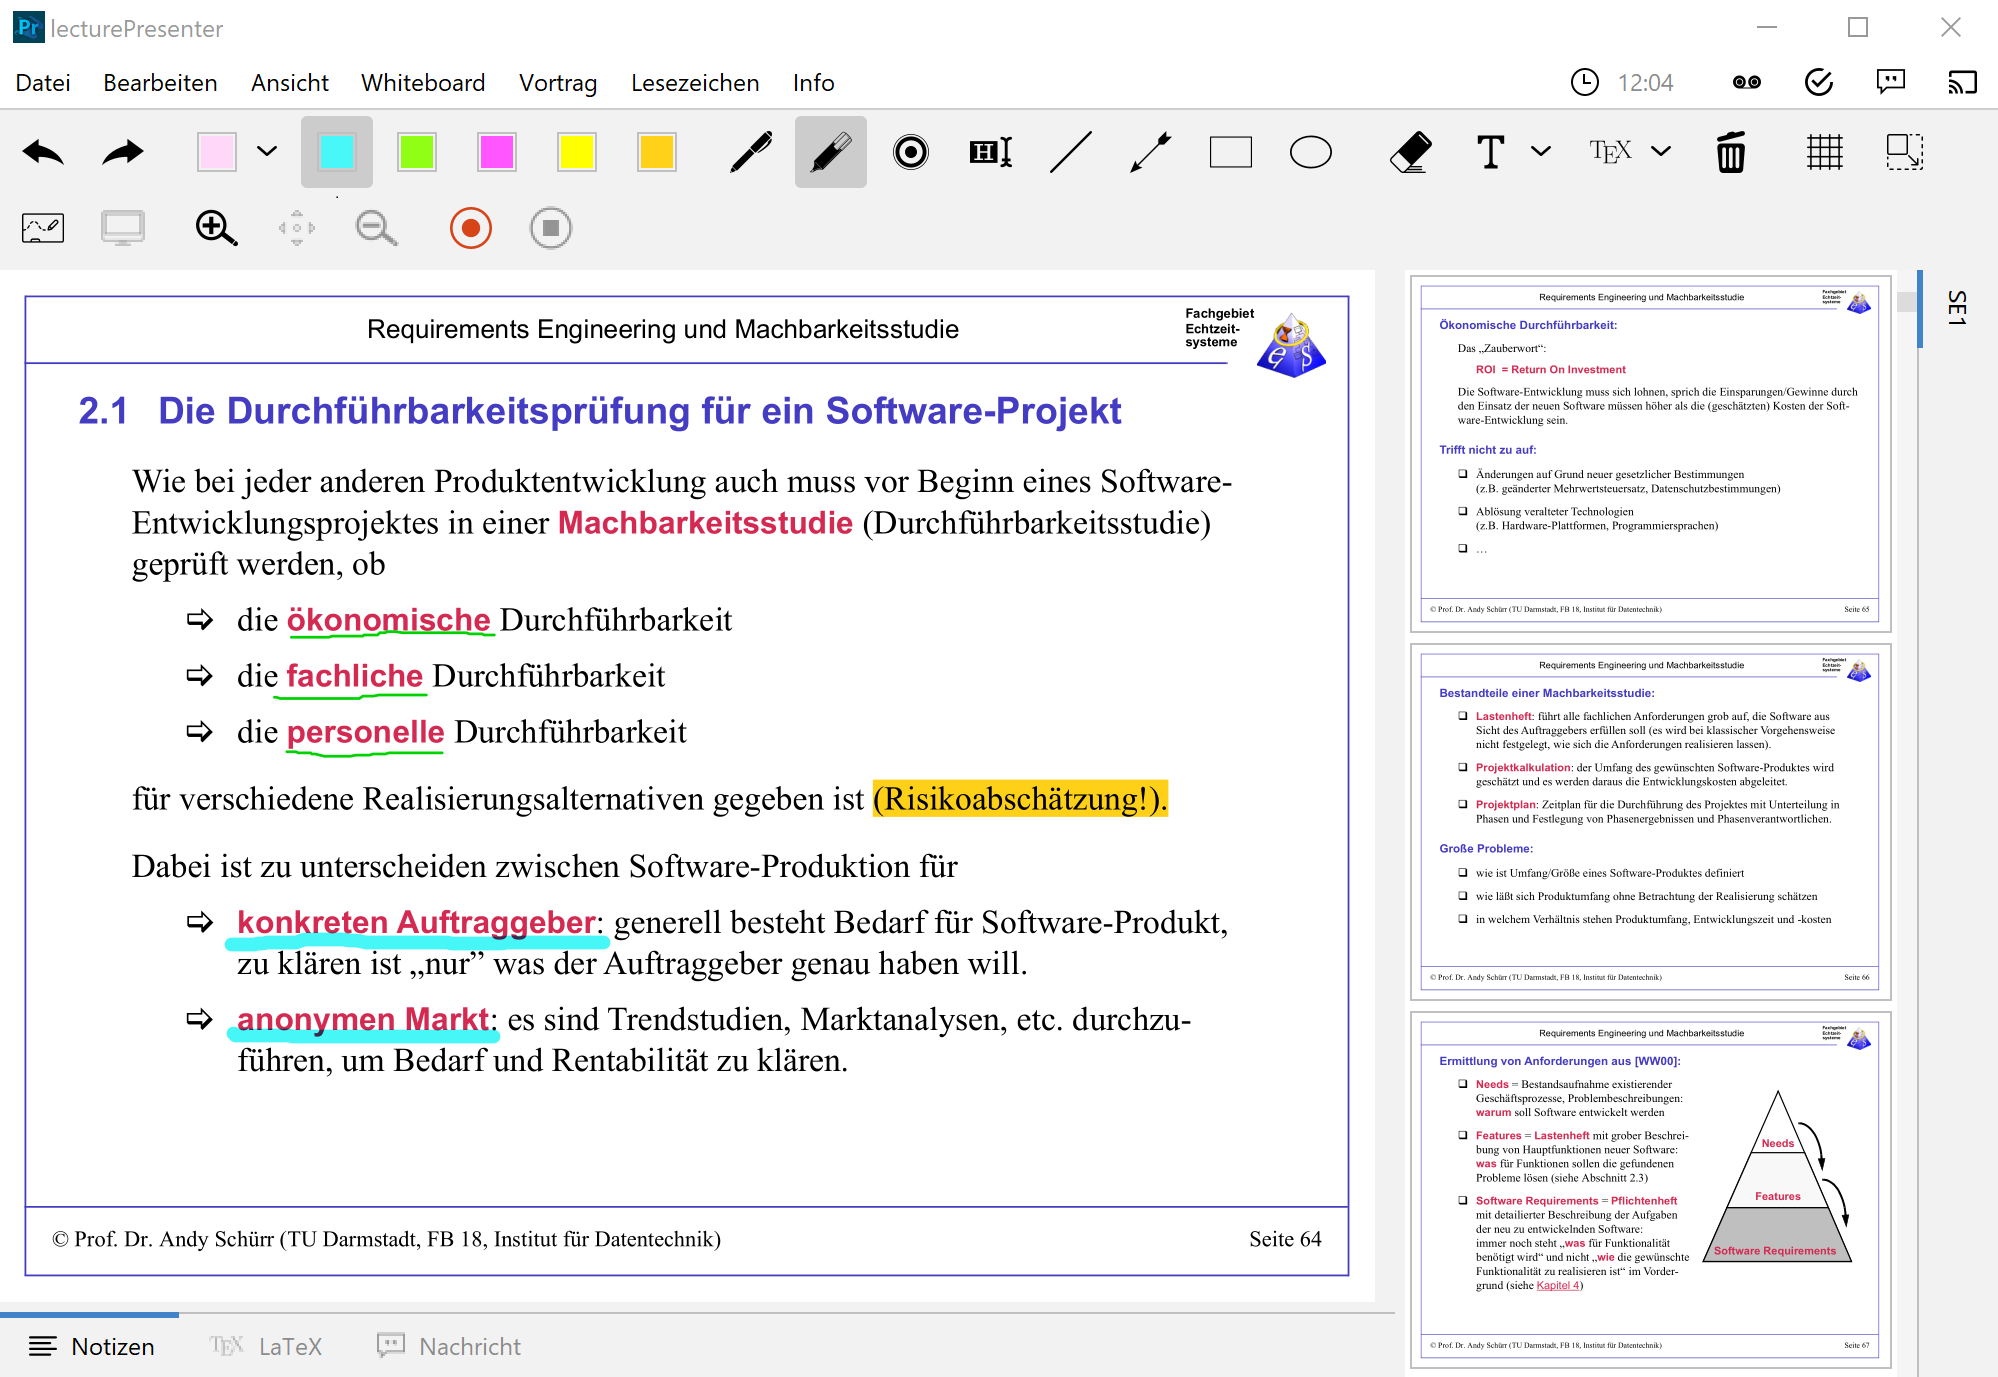 Highlight important points on your slides with annotations.